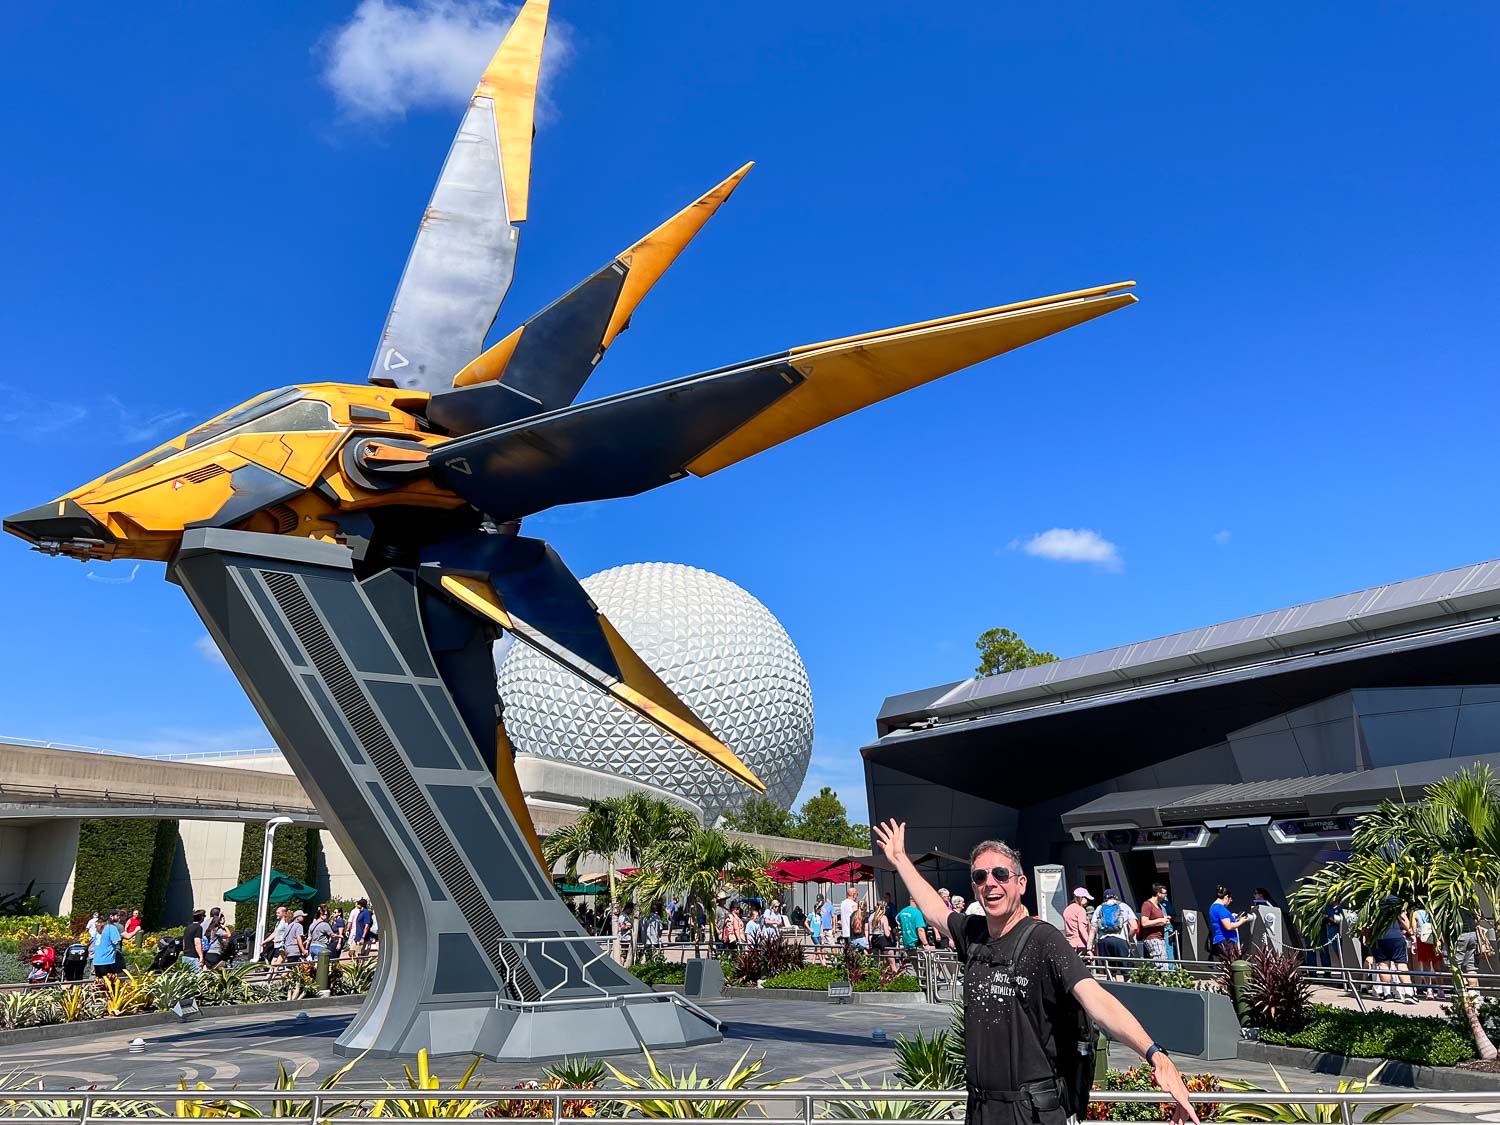 The Star Blaster and Epcot dome outside the Guardians of the Galaxy ride at Epcot, Disney World Florida